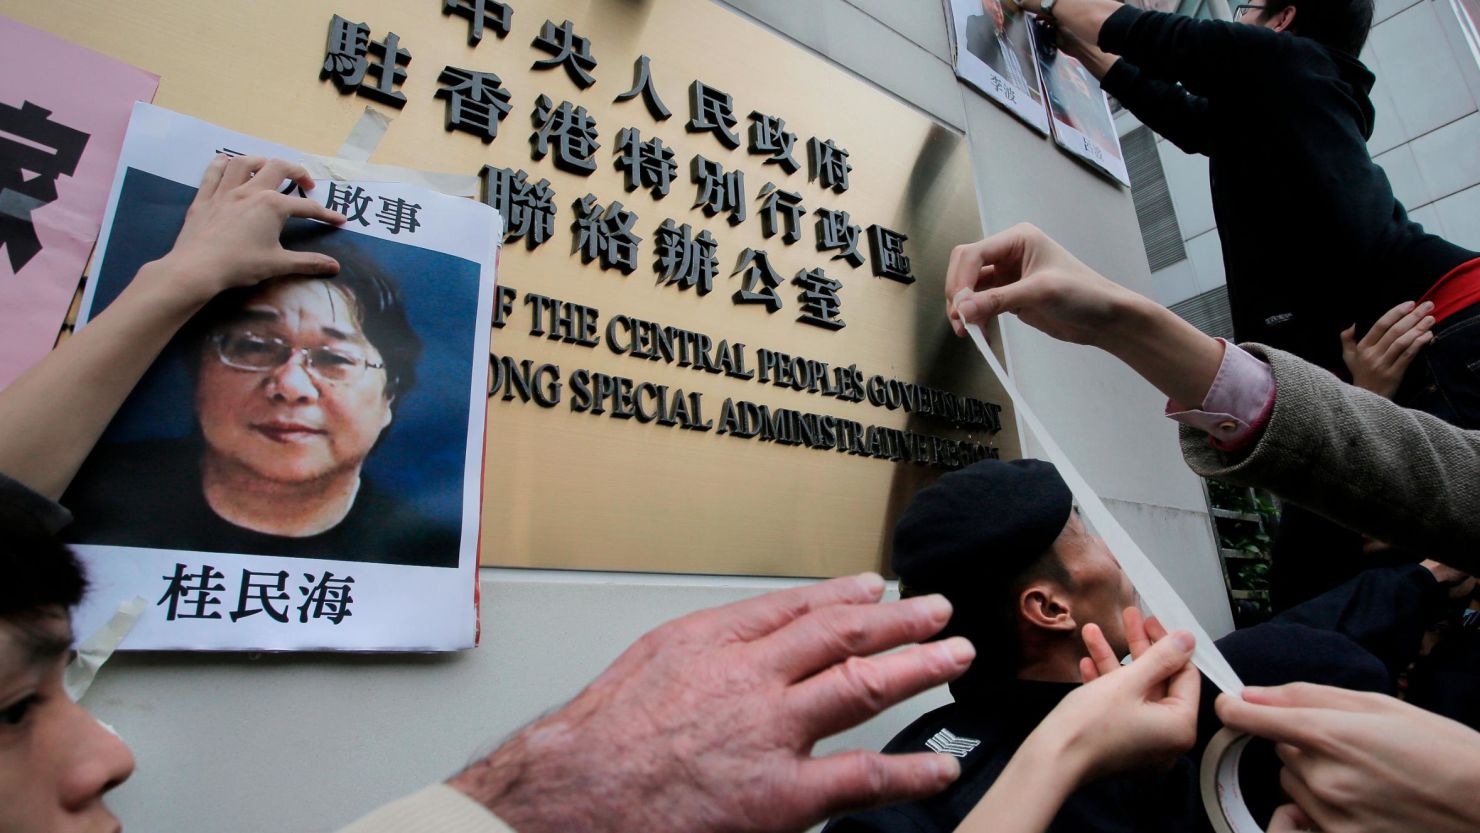 Protesters stick photos of missing publisher Gui Minhai on the outside of a Chinese government building in Hong Kong in July 2016. Gui first disappeared in 2015.